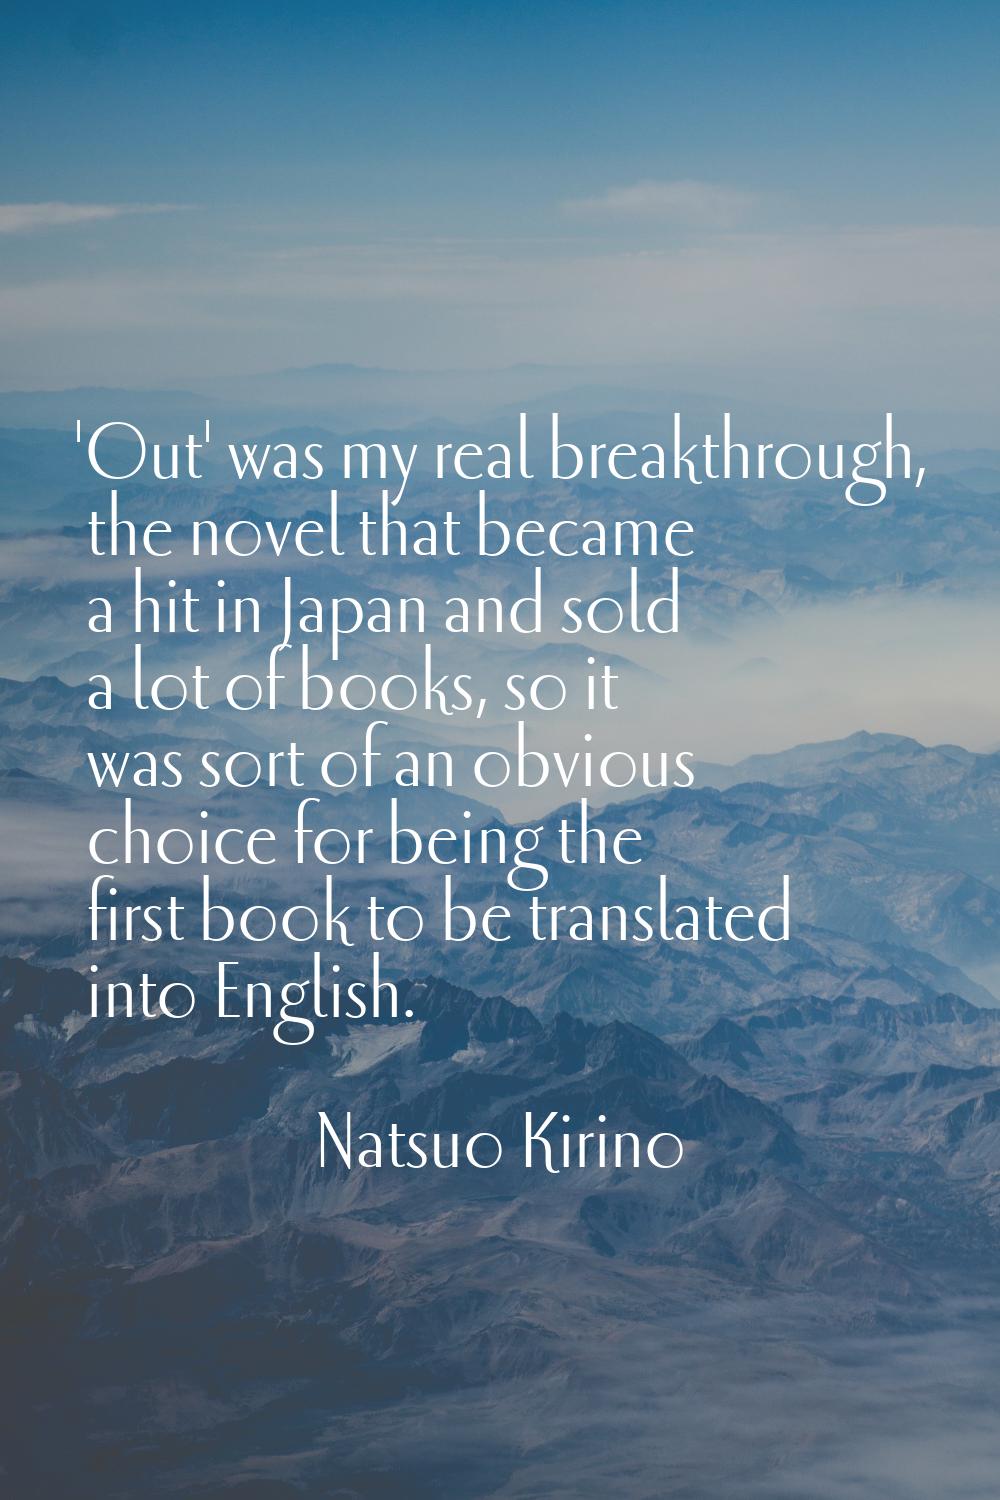 'Out' was my real breakthrough, the novel that became a hit in Japan and sold a lot of books, so it